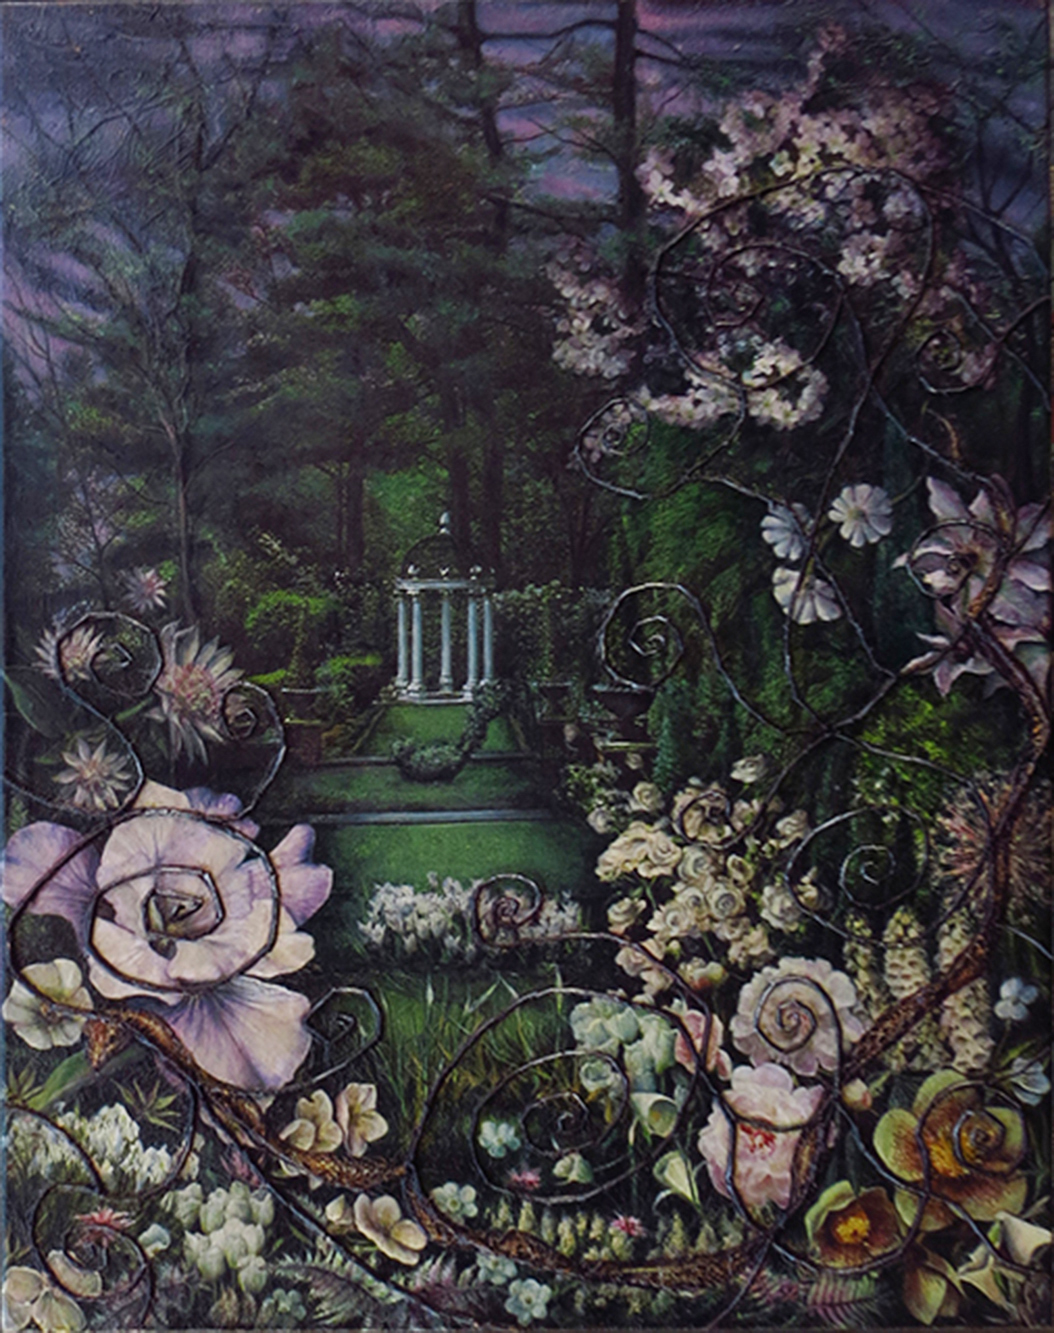 Garden Series – “The Dark Garden”  – collage on canvas with magazine clippings, twigs, snake skin and oil – 19″ W x 24″ H